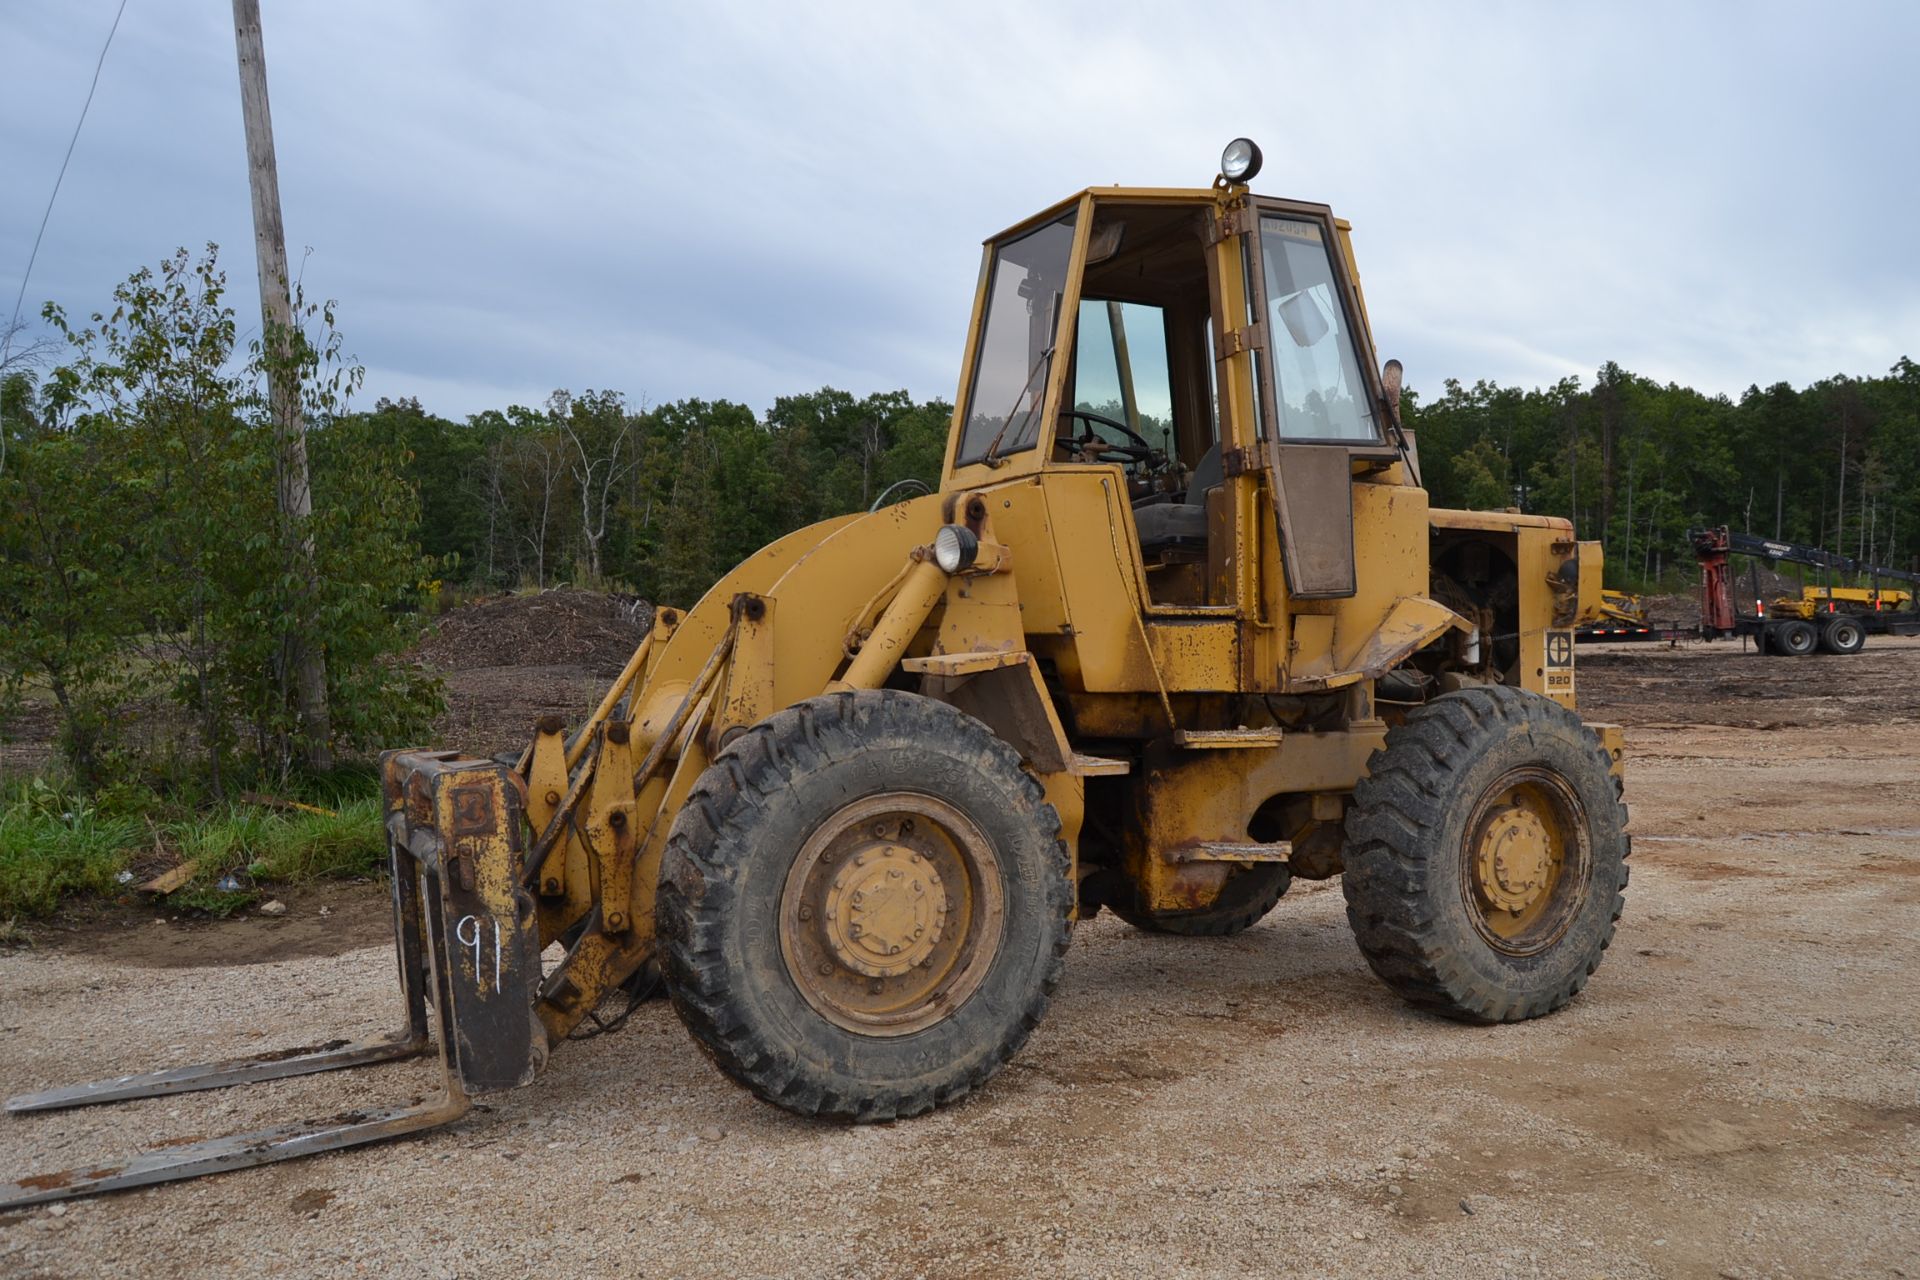 CAT 920 ARTICULATING WHEEL LOADER W/ ENCLOSED CAB W/ QUICK ATTACH W/ FORKS W/ 15.5X25 RUB SN#62K9449 - Image 2 of 4